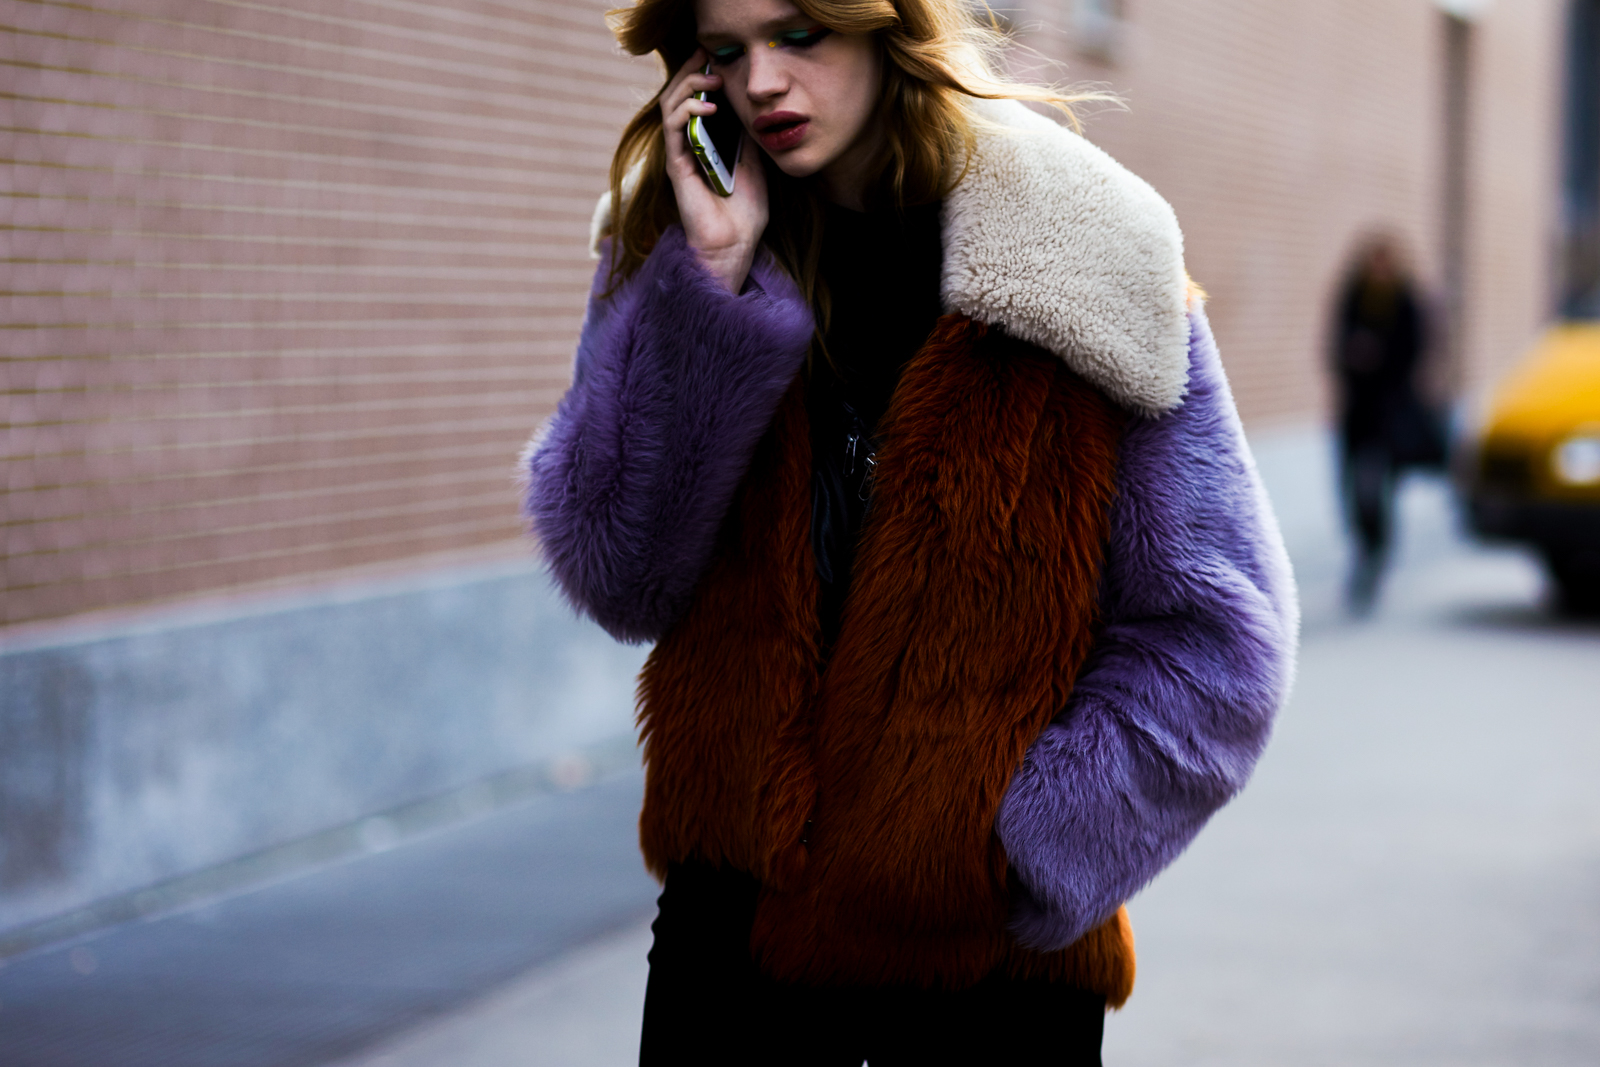 MFW Street Style: Model Stella Lucia wearing a color-blocked fur jacket and multicolored make up after the Fendi Fall 2016 fashion show in Milan, Italy